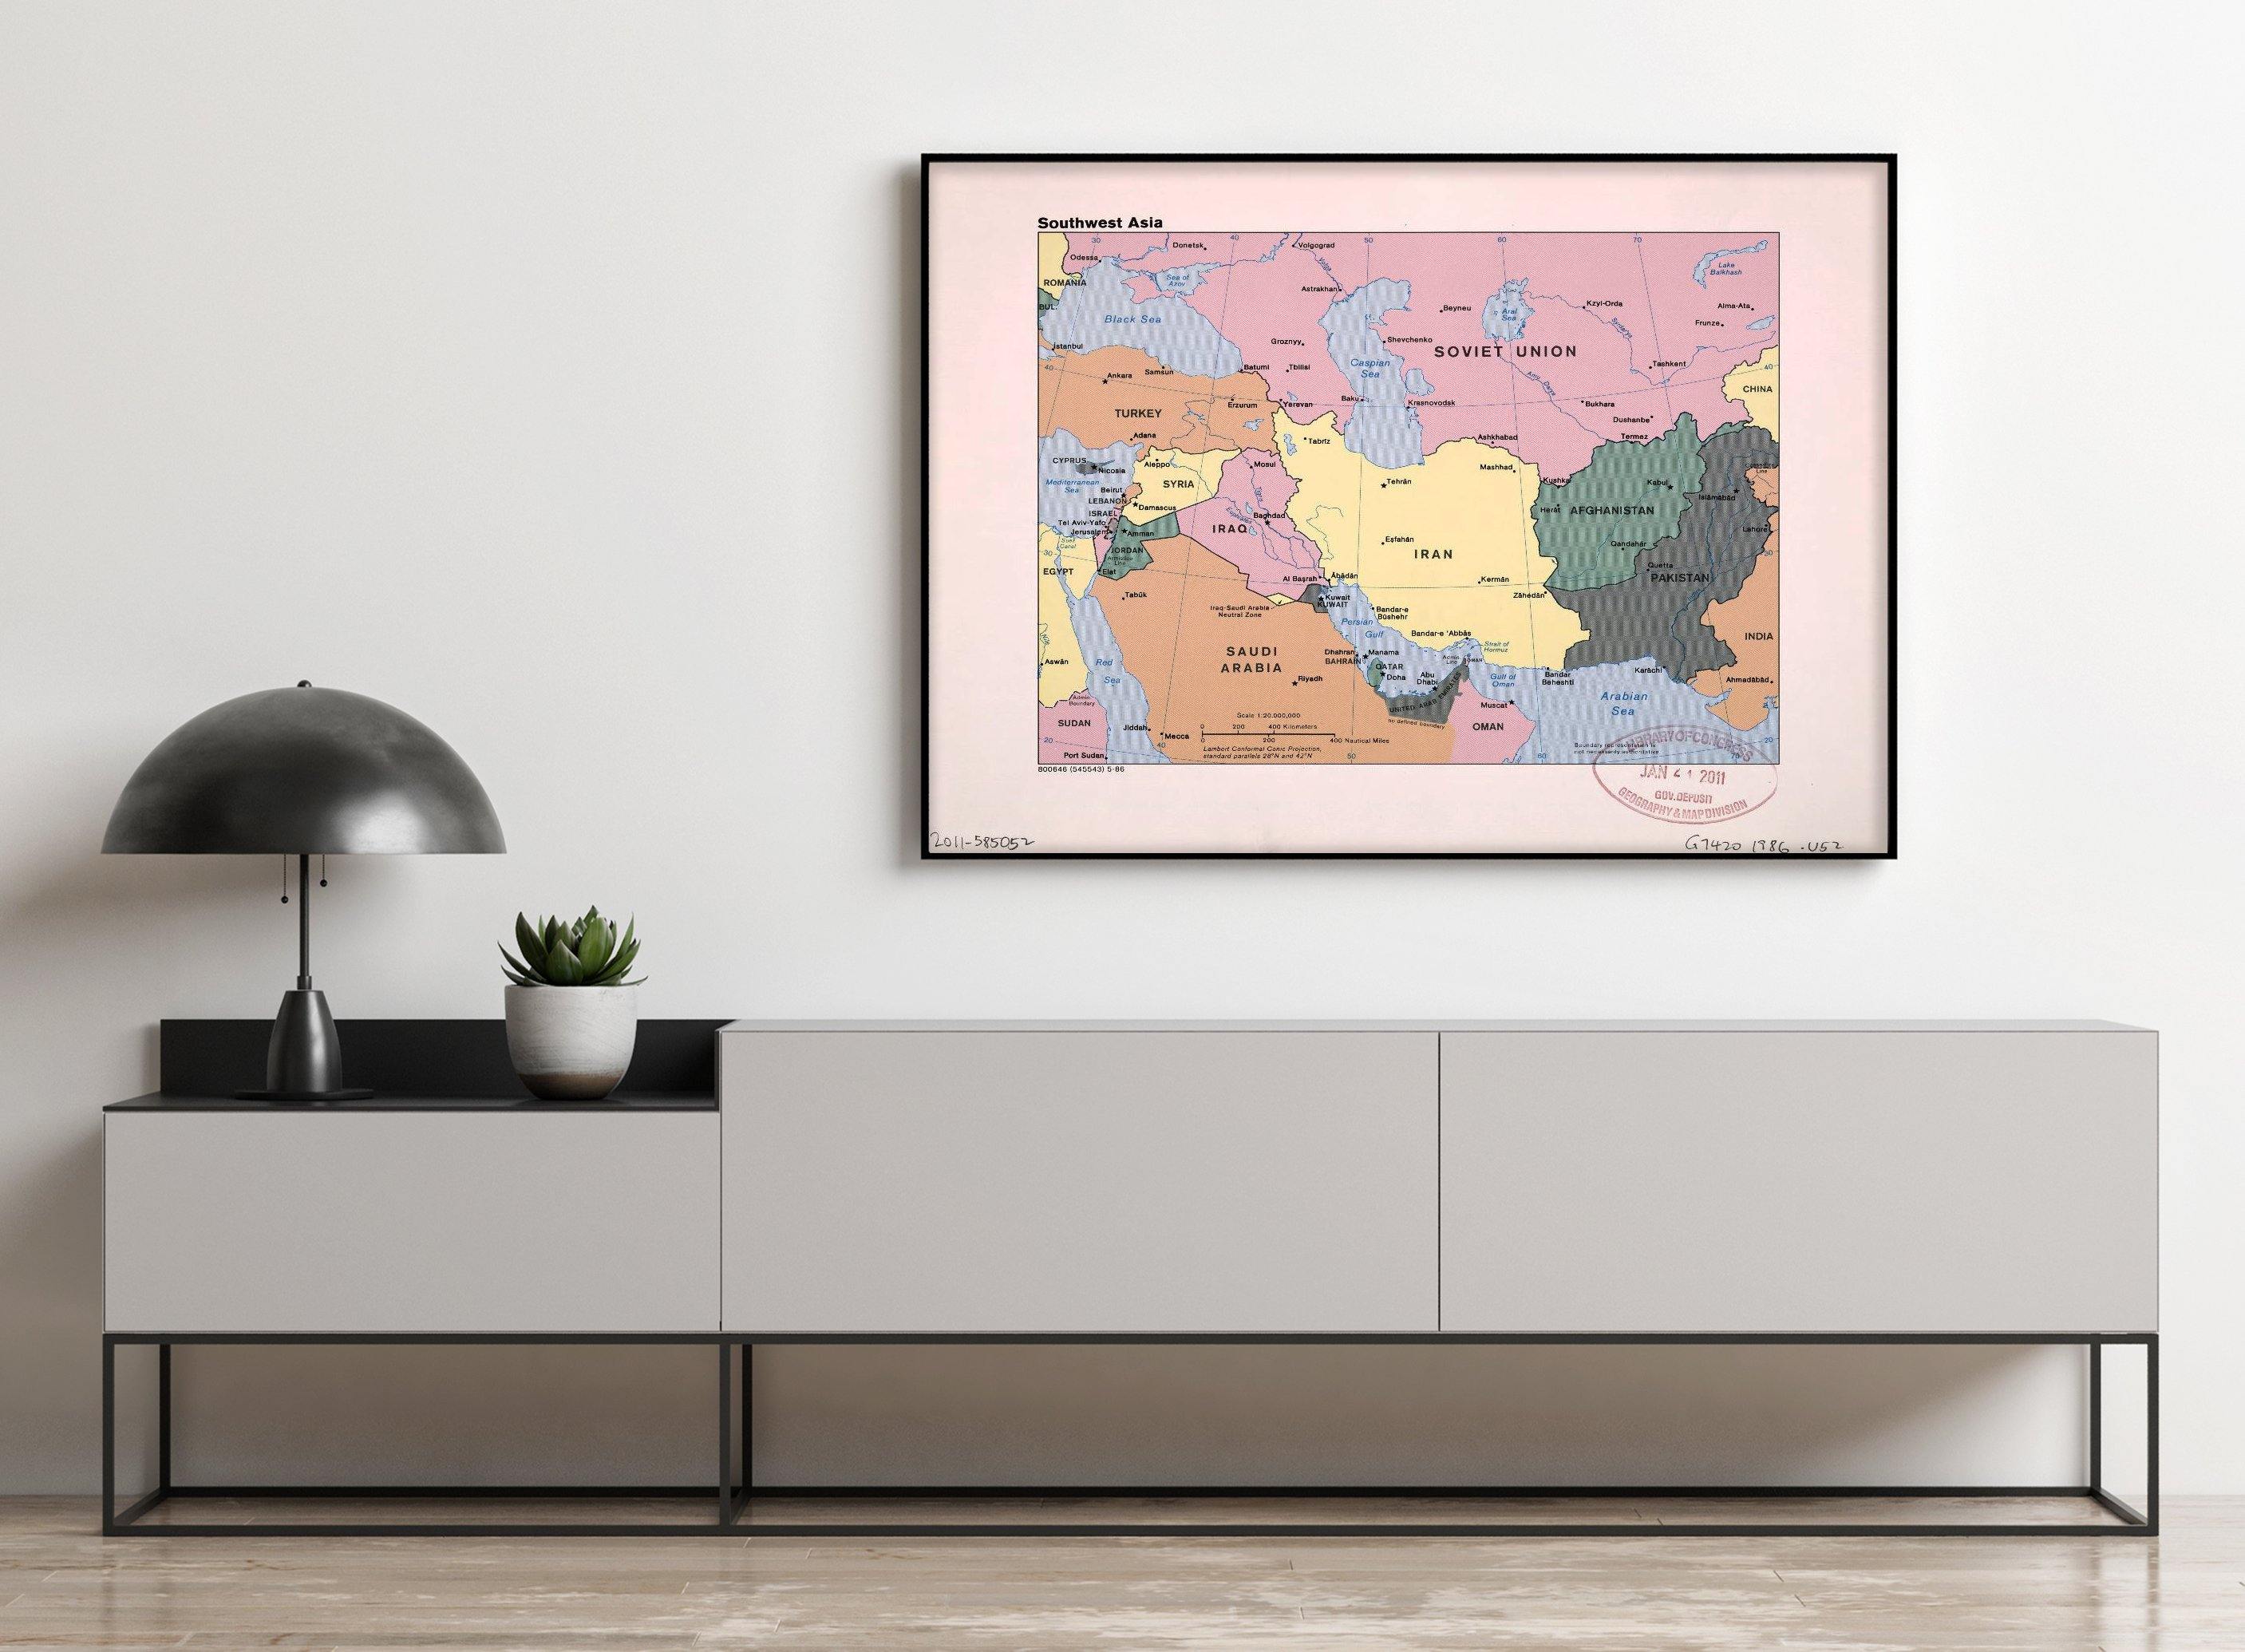 1986 Map| Southwest Asia| Middle East Map Size: 18 inches x 24 inches - New York Map Company